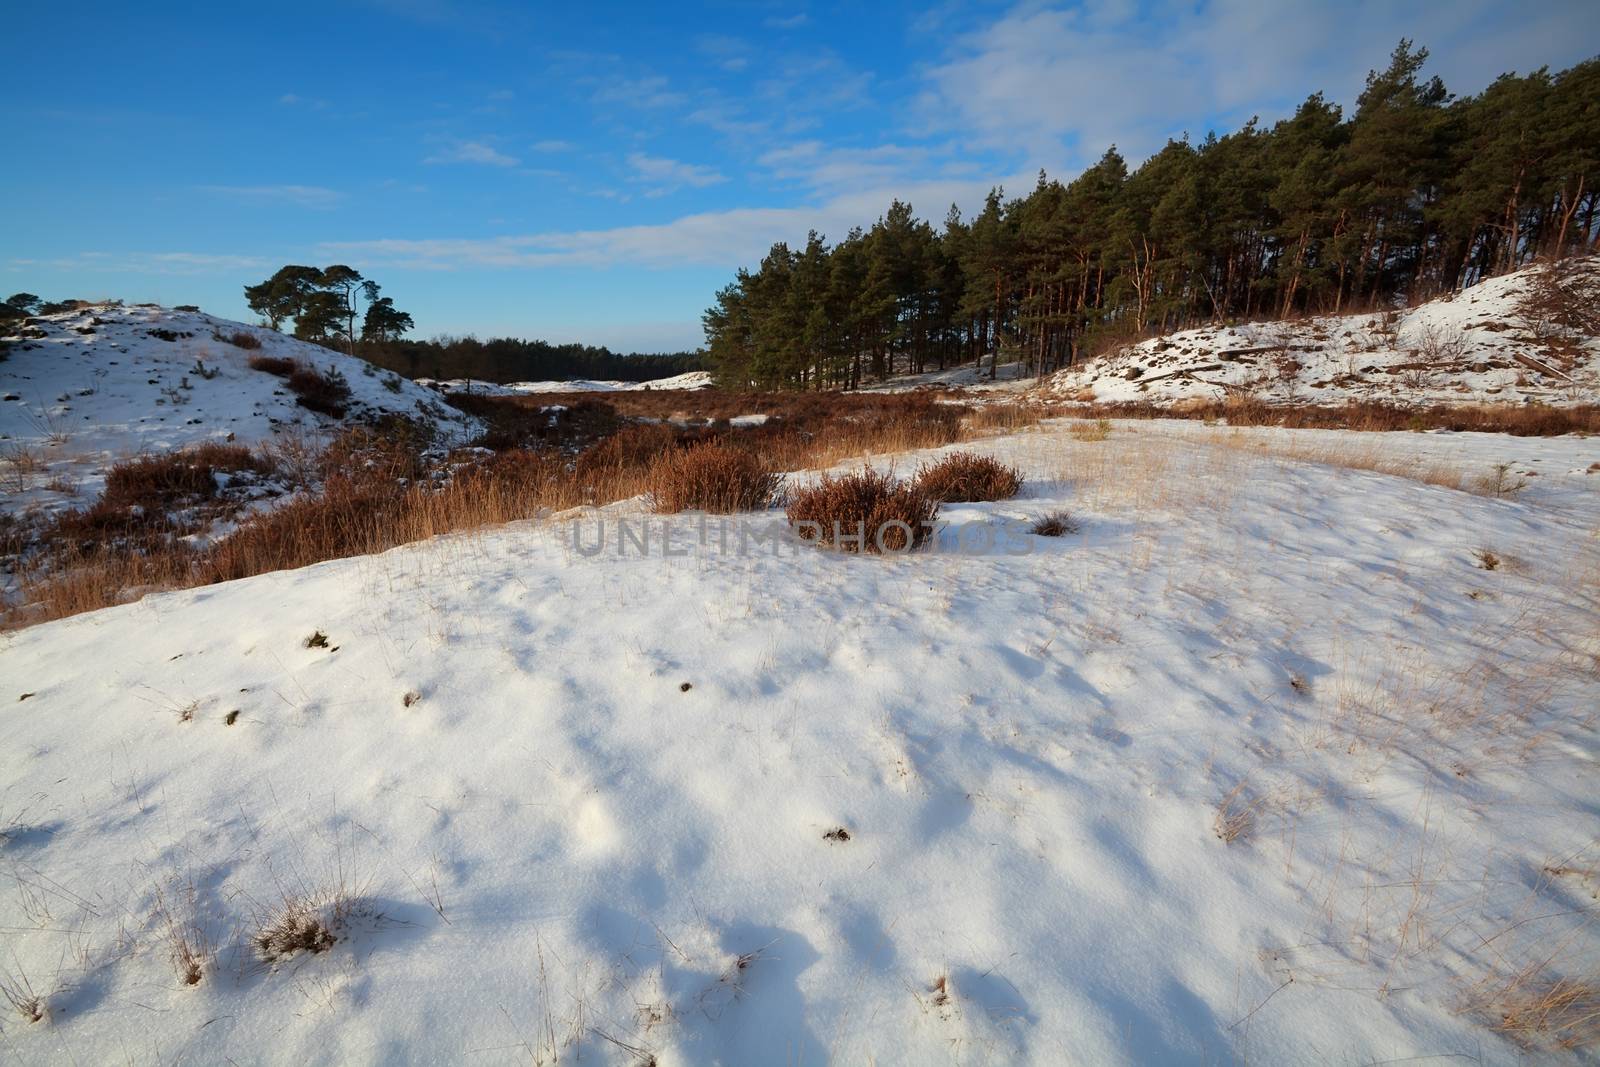 dunes and meadow in snow by coniferous forest, Gelderland, Netherlands